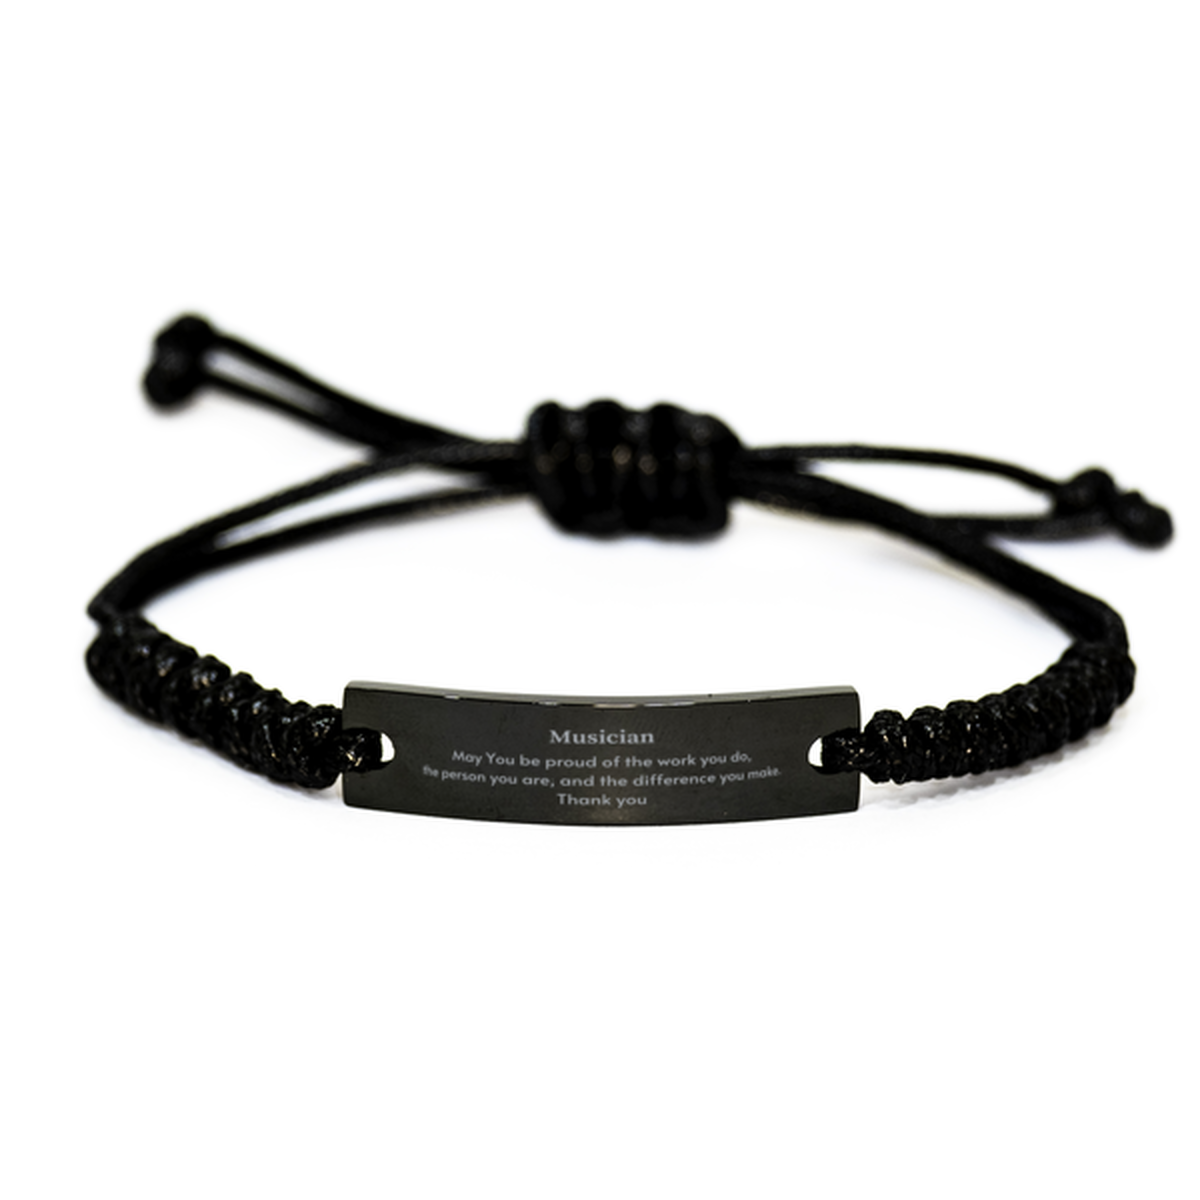 Heartwarming Black Rope Bracelet Retirement Coworkers Gifts for Musician, Musician May You be proud of the work you do, the person you are Gifts for Boss Men Women Friends